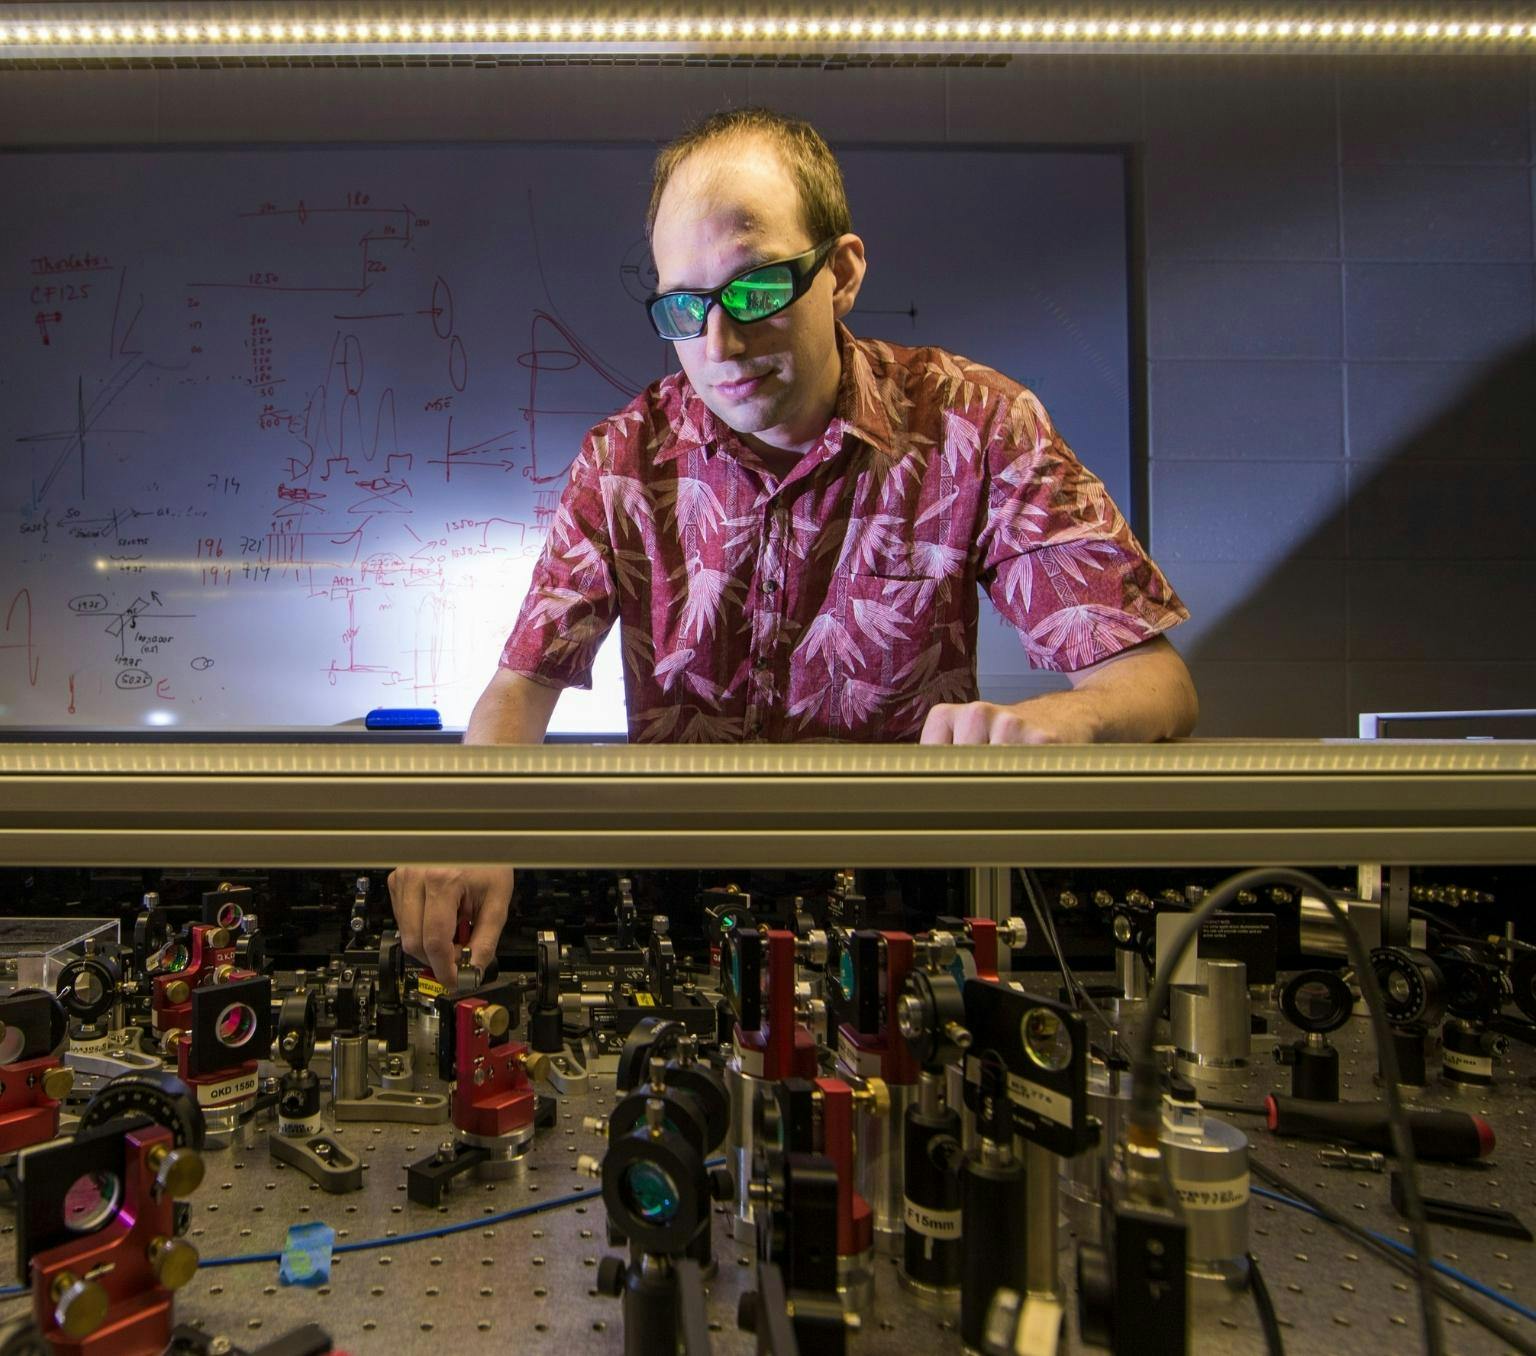 Bennet is wearing sunglasses with reflective green lenses and a pink floral collared shirt. He is leaning over a desk covered in small technology objects. A whiteboard with scientific diagrams is behind him.